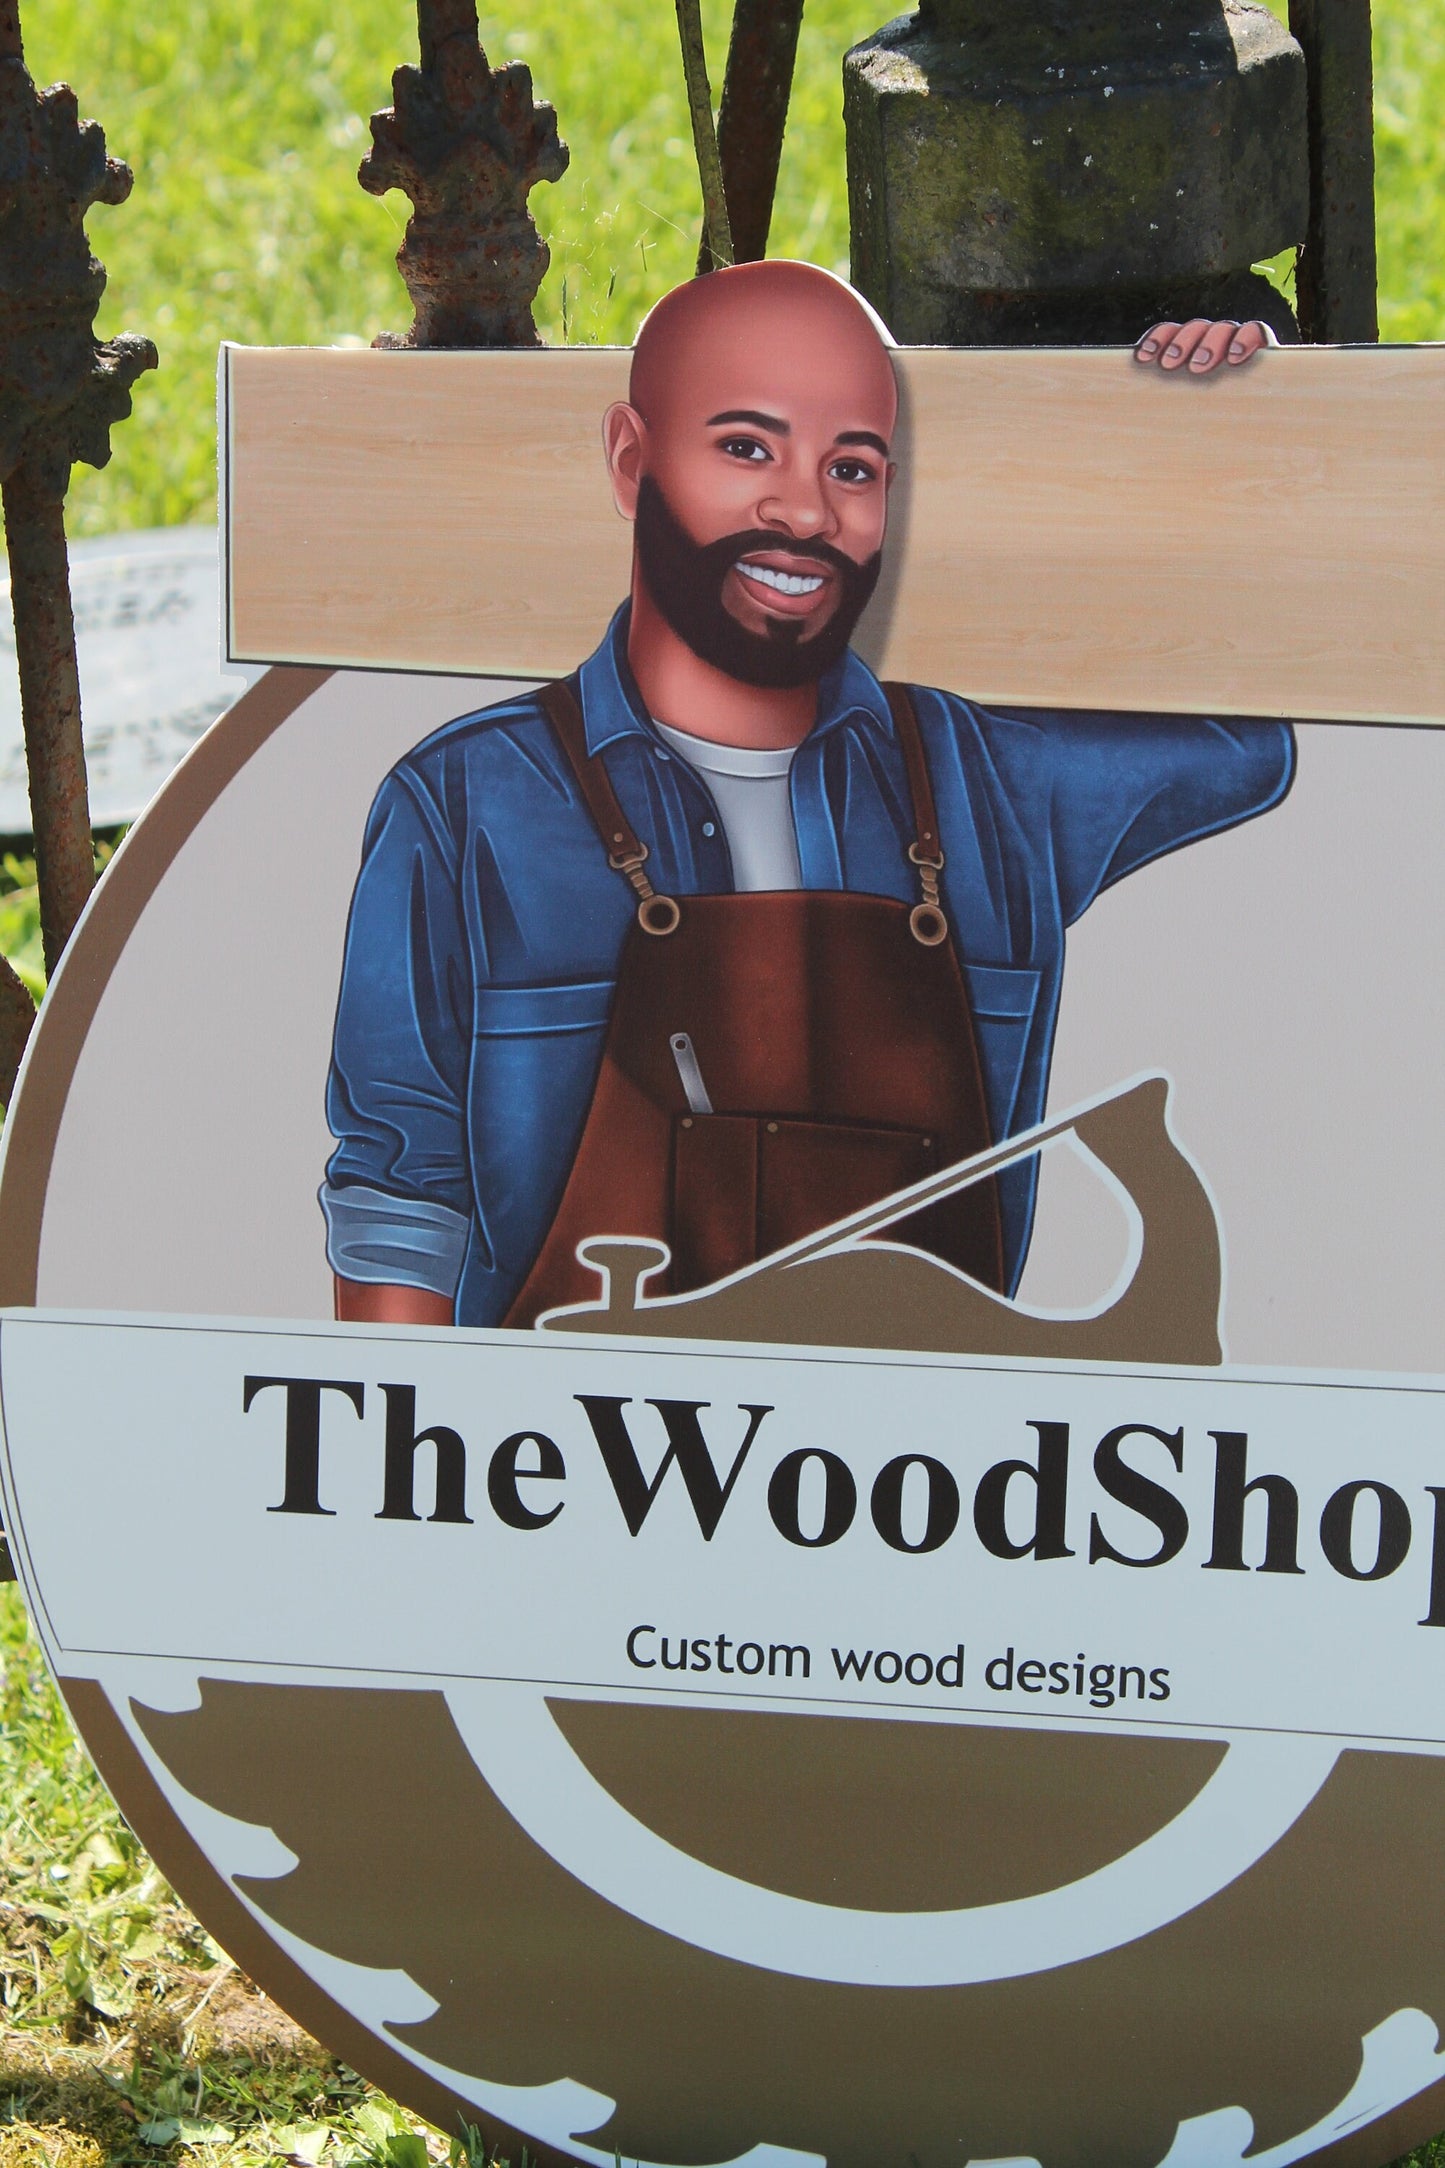 Woodshop Character Personalized Waterproof Sign Contoured Smooth Round Outdoor Ready for Business Logo Great for hanging or wall mounted